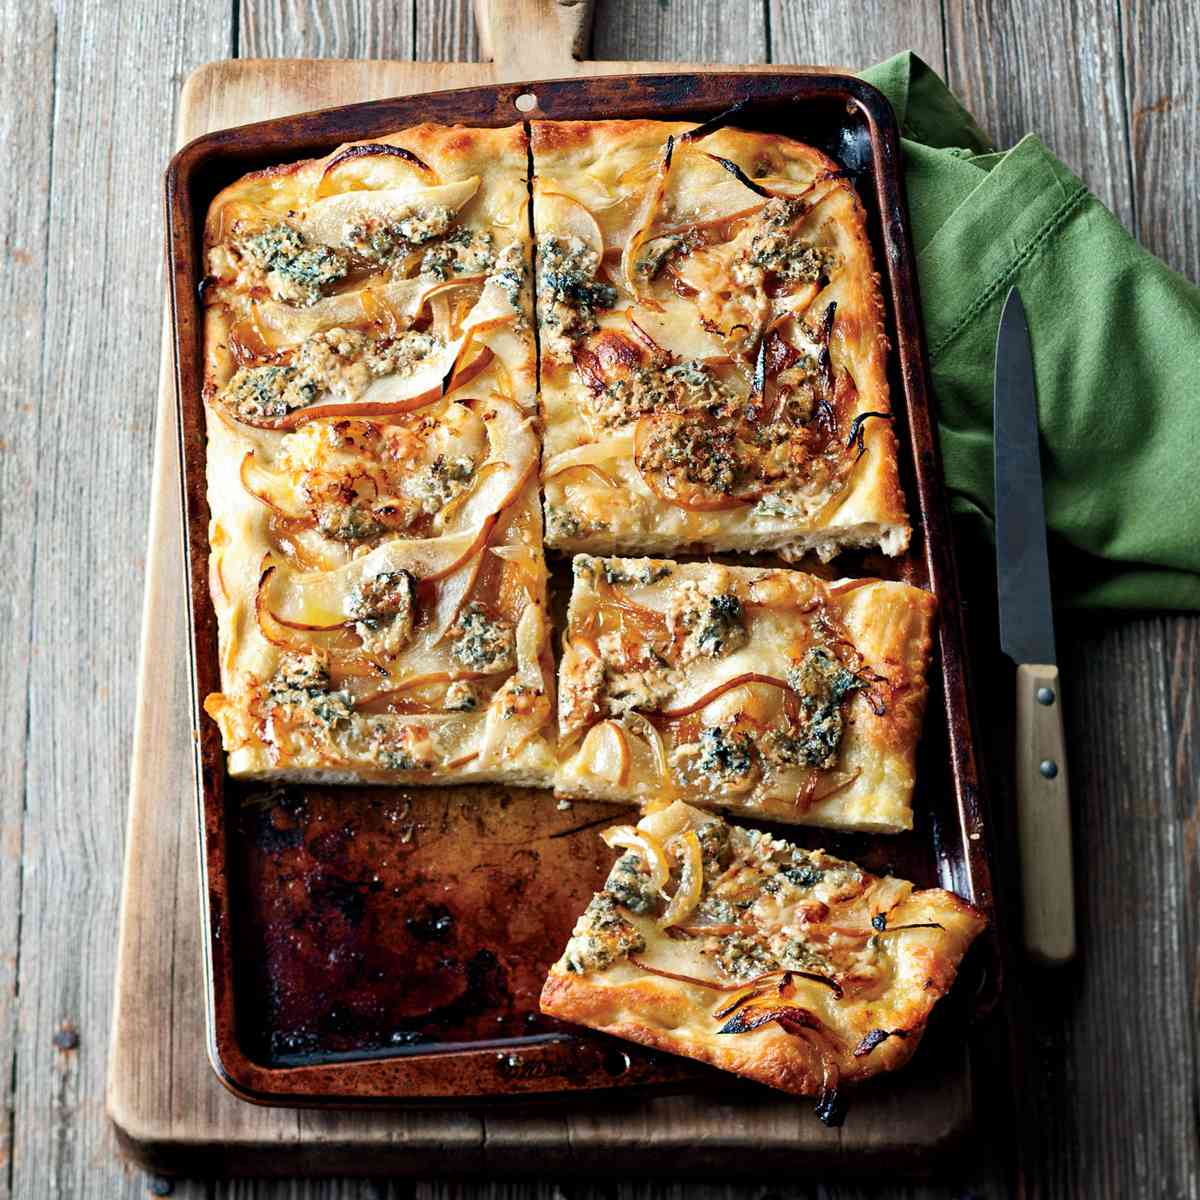 Focaccia with Caramelized Onions, Pear and Blue Cheese. Photo © Quentin Bacon